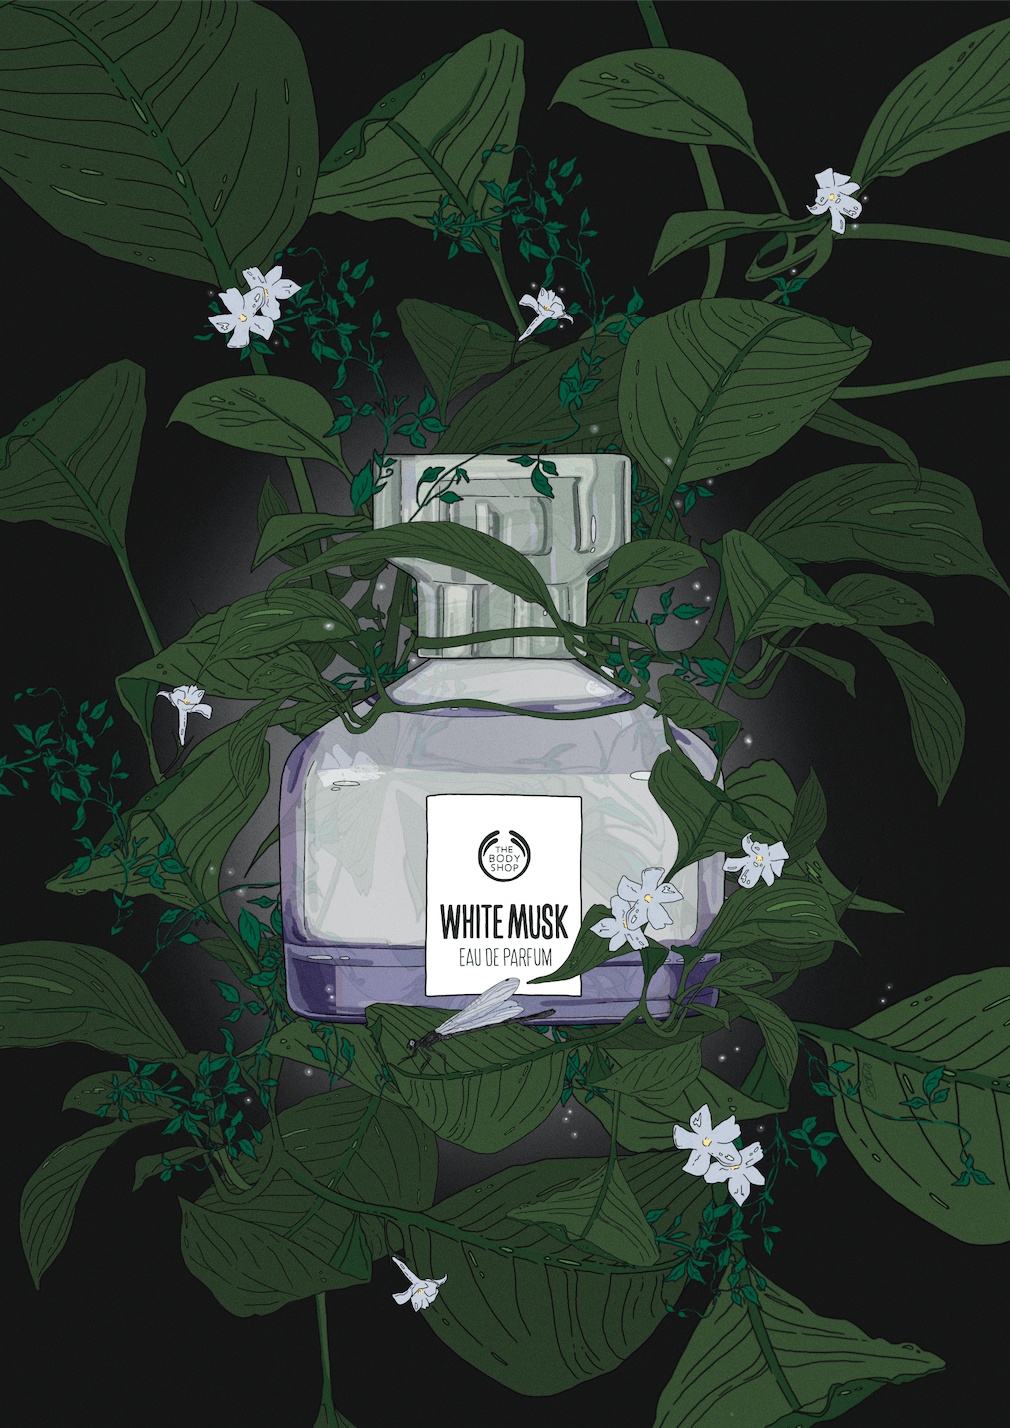 BA illustration work by Poppy Lam showing a perfume bottle wrapped with botanical elements on a black background